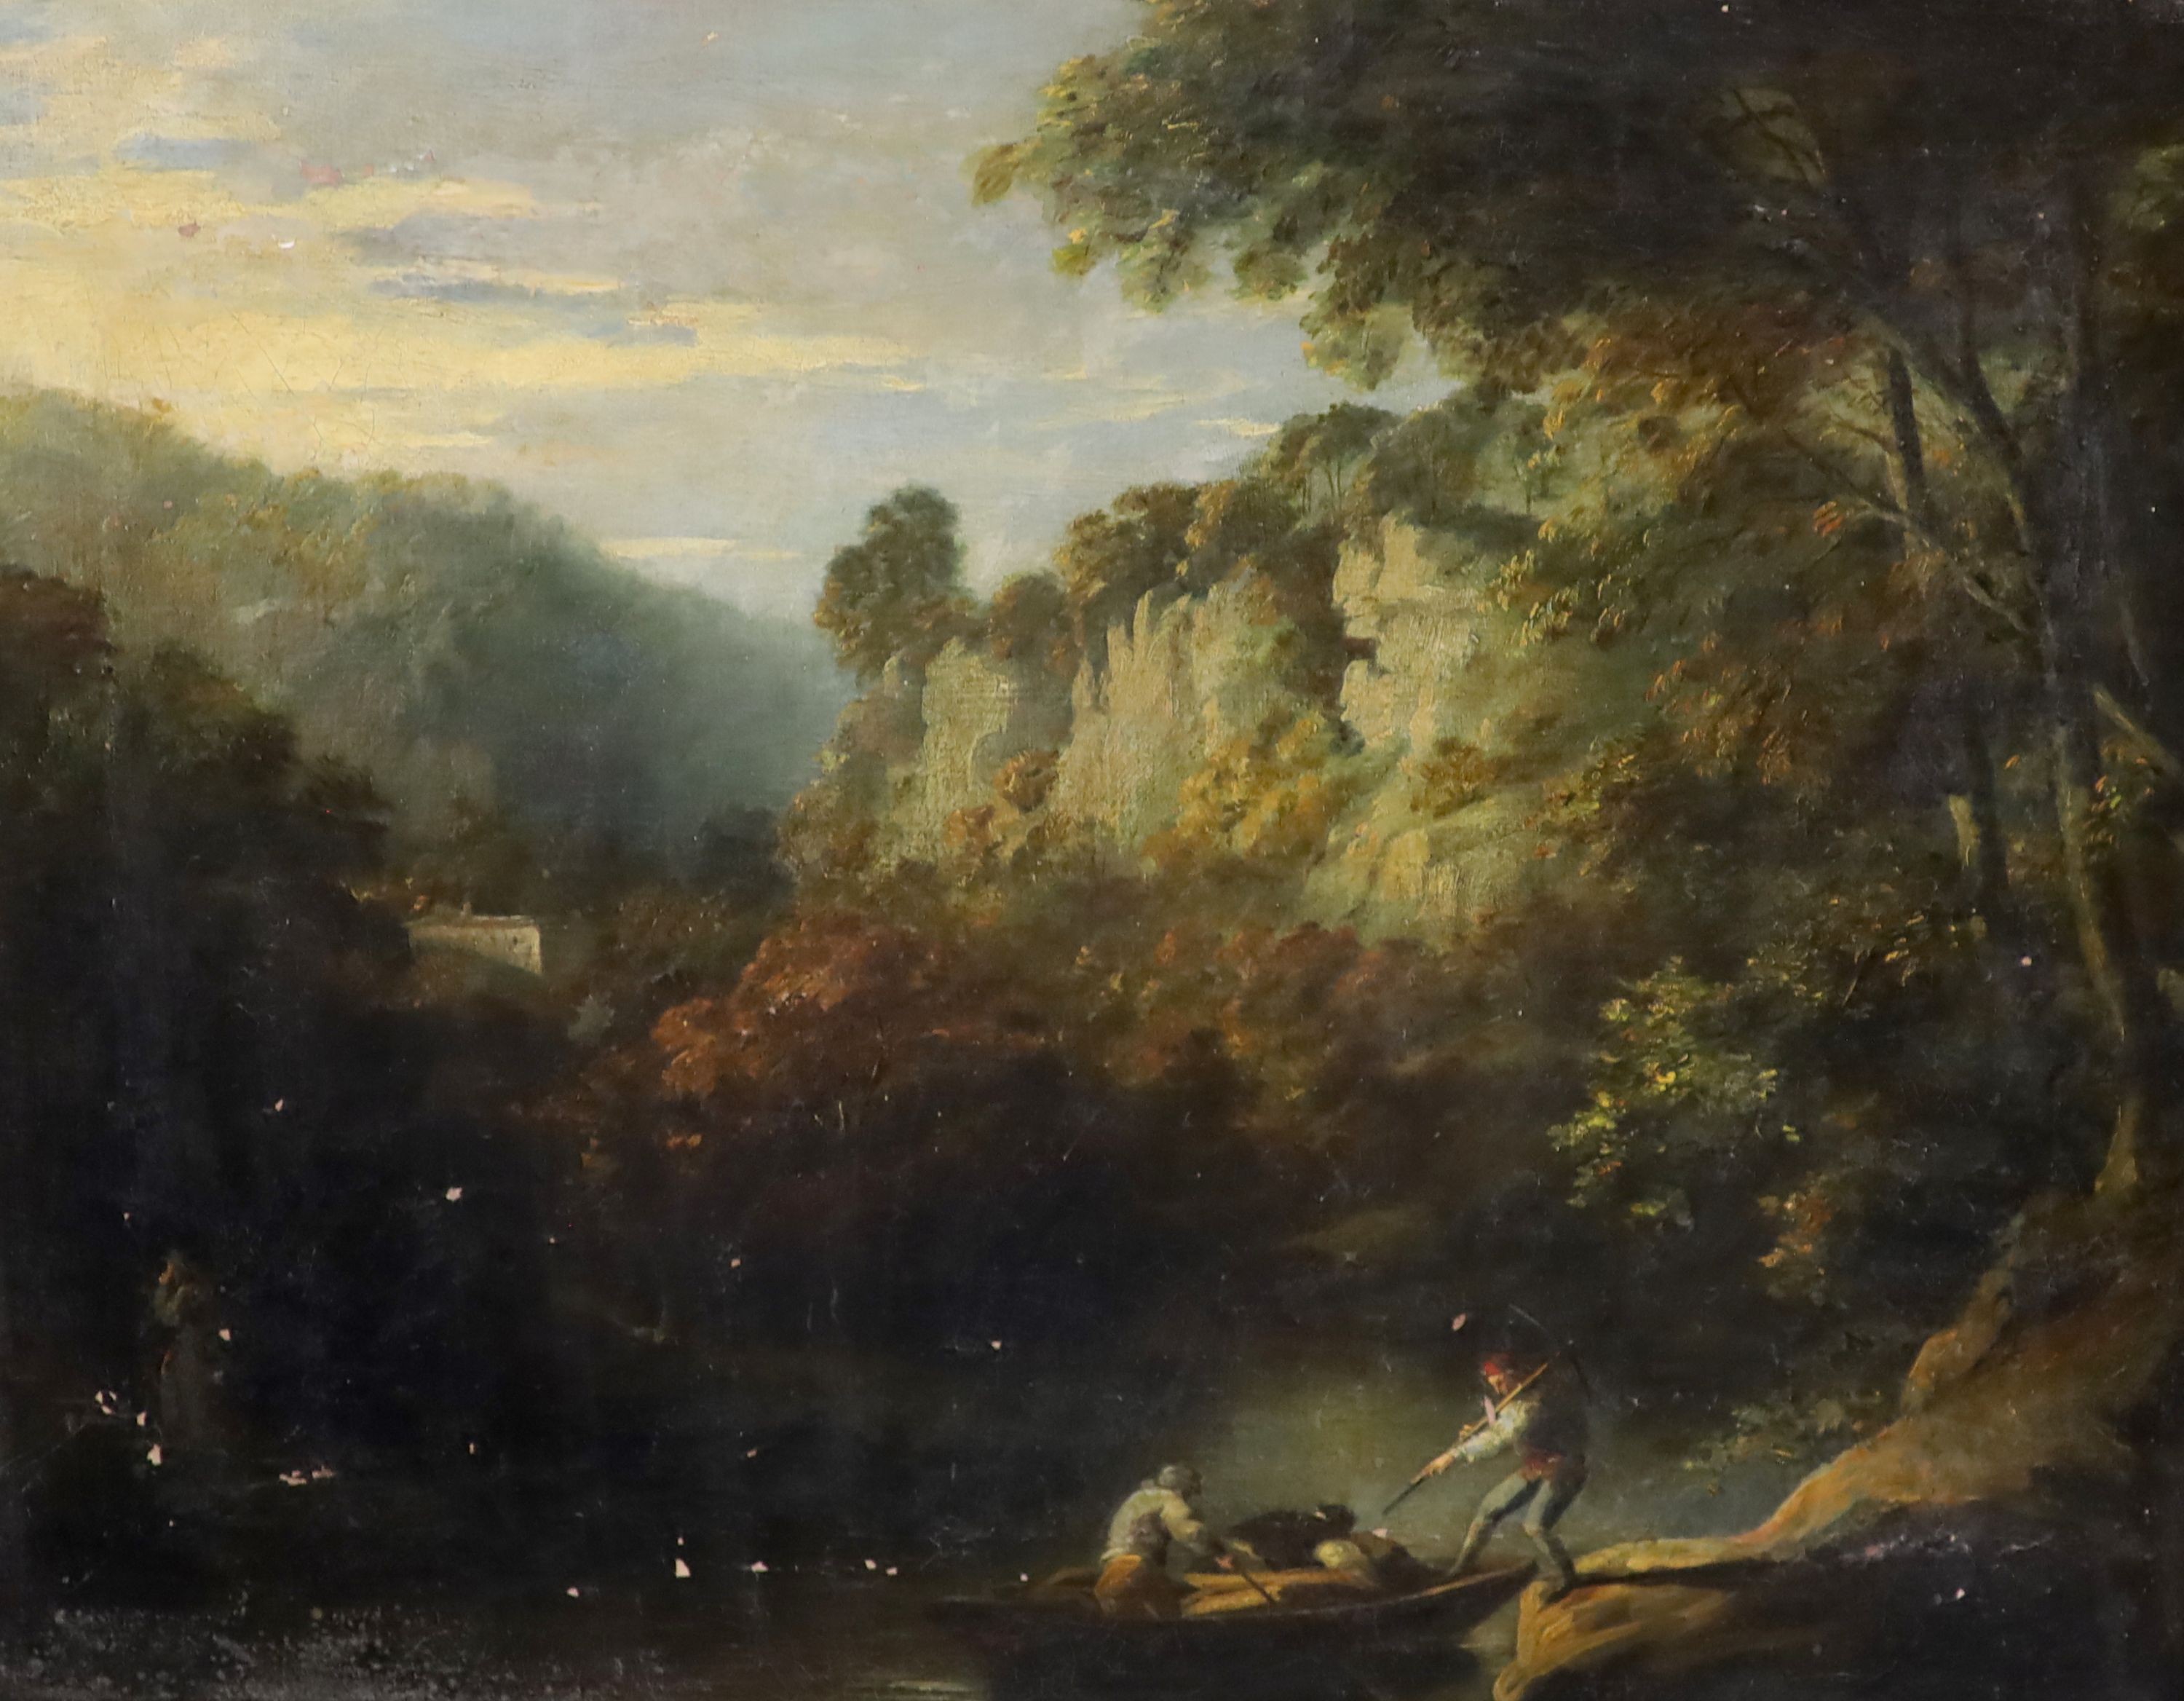 18th century English School, Italianate landscape with figures alighting upon a boat, Oil on canvas, 51 x 64cm.